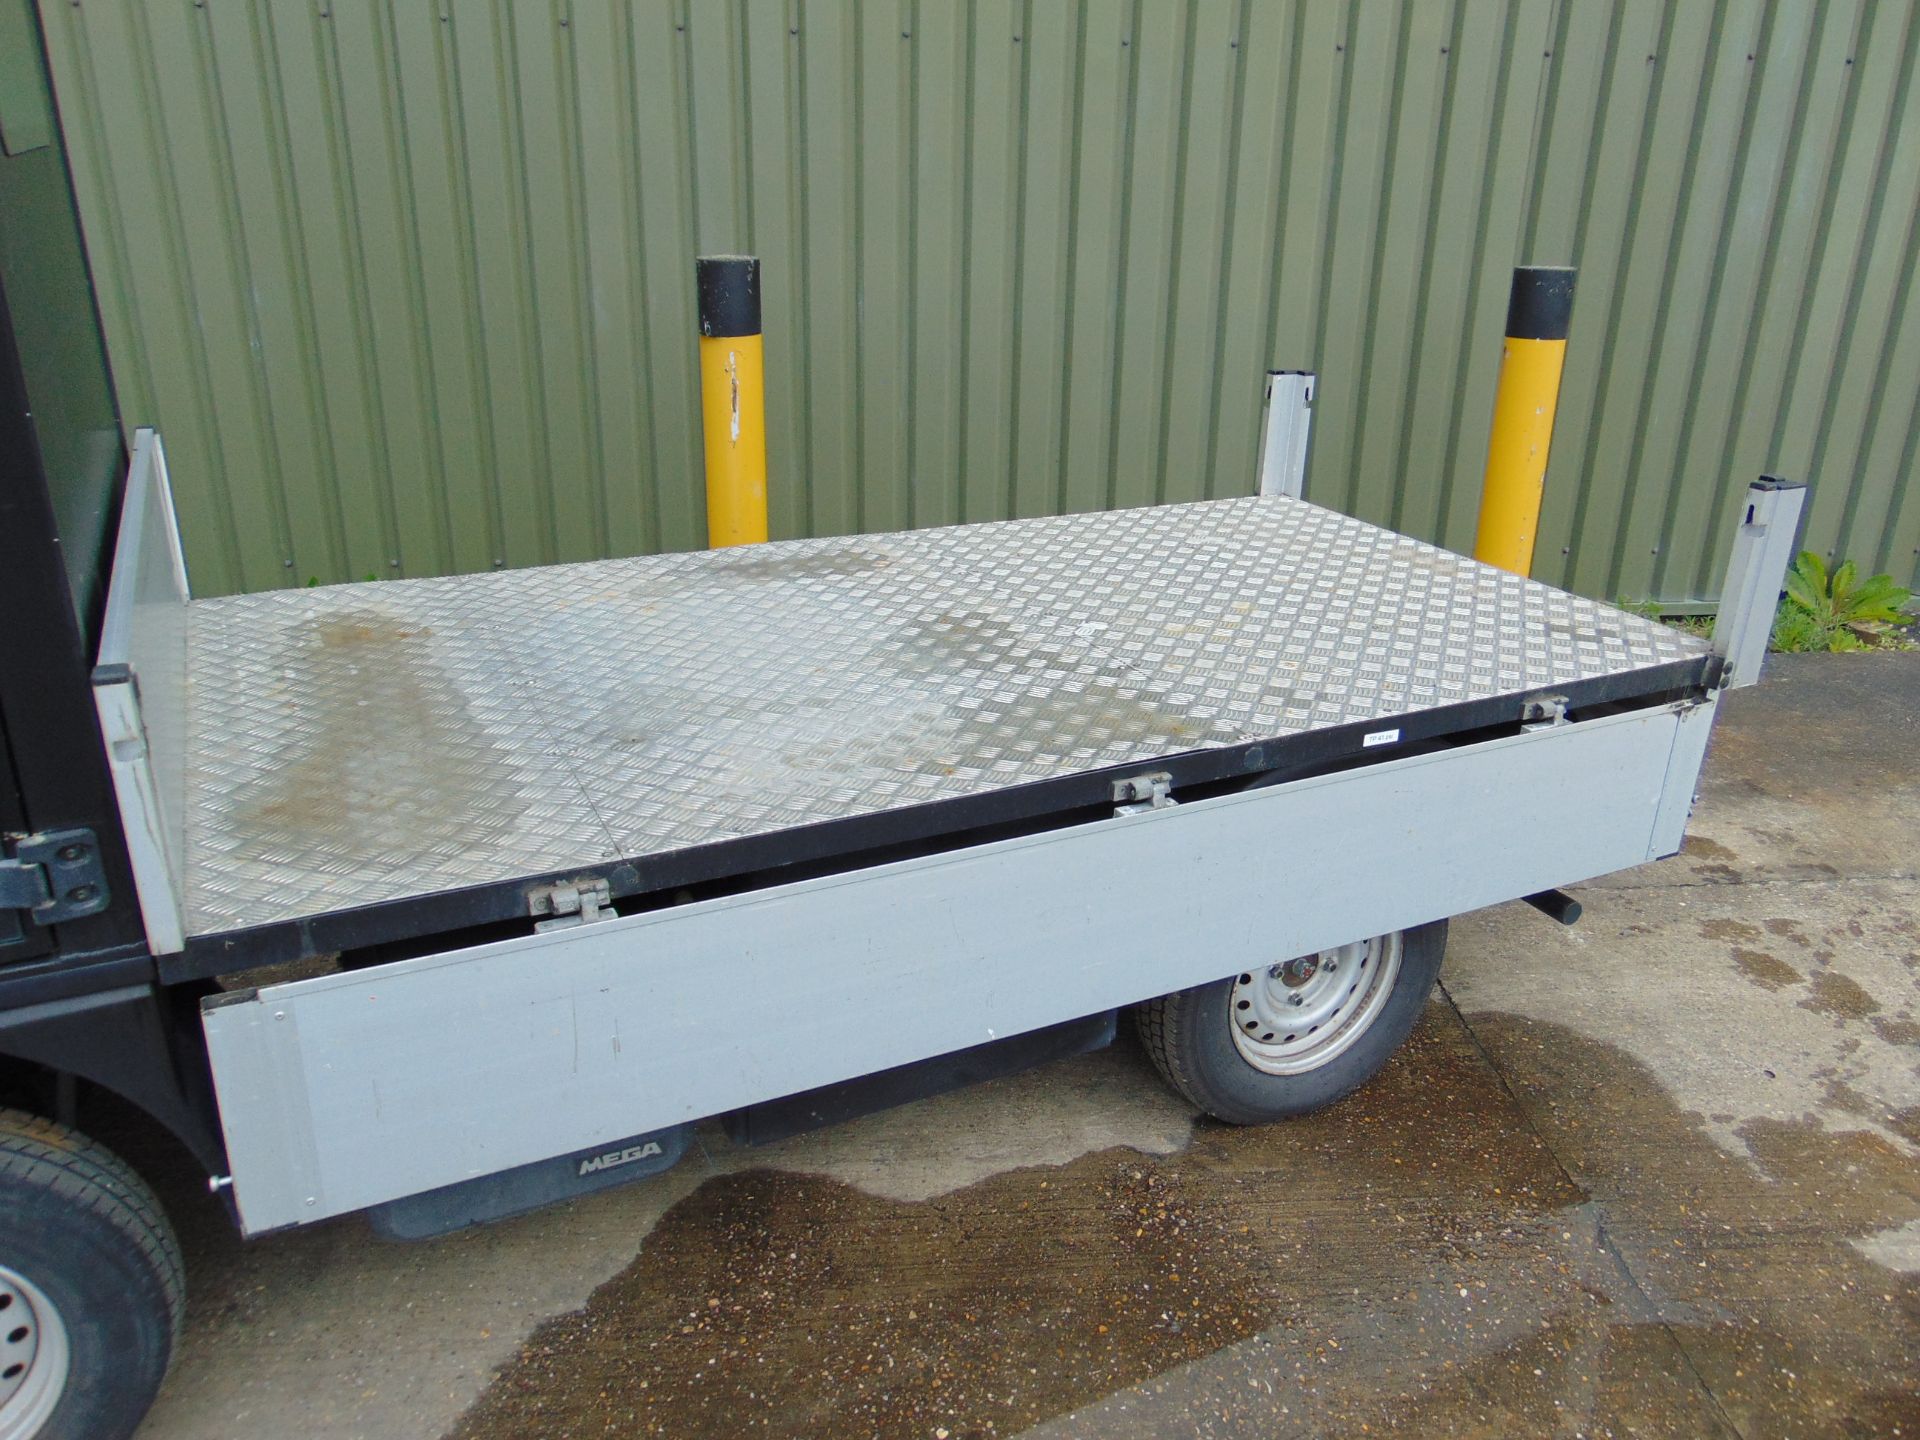 MEGA e-Worker Electric Utility Vehicle - Flat-Bed w/ Fold Down Sides - Image 19 of 43